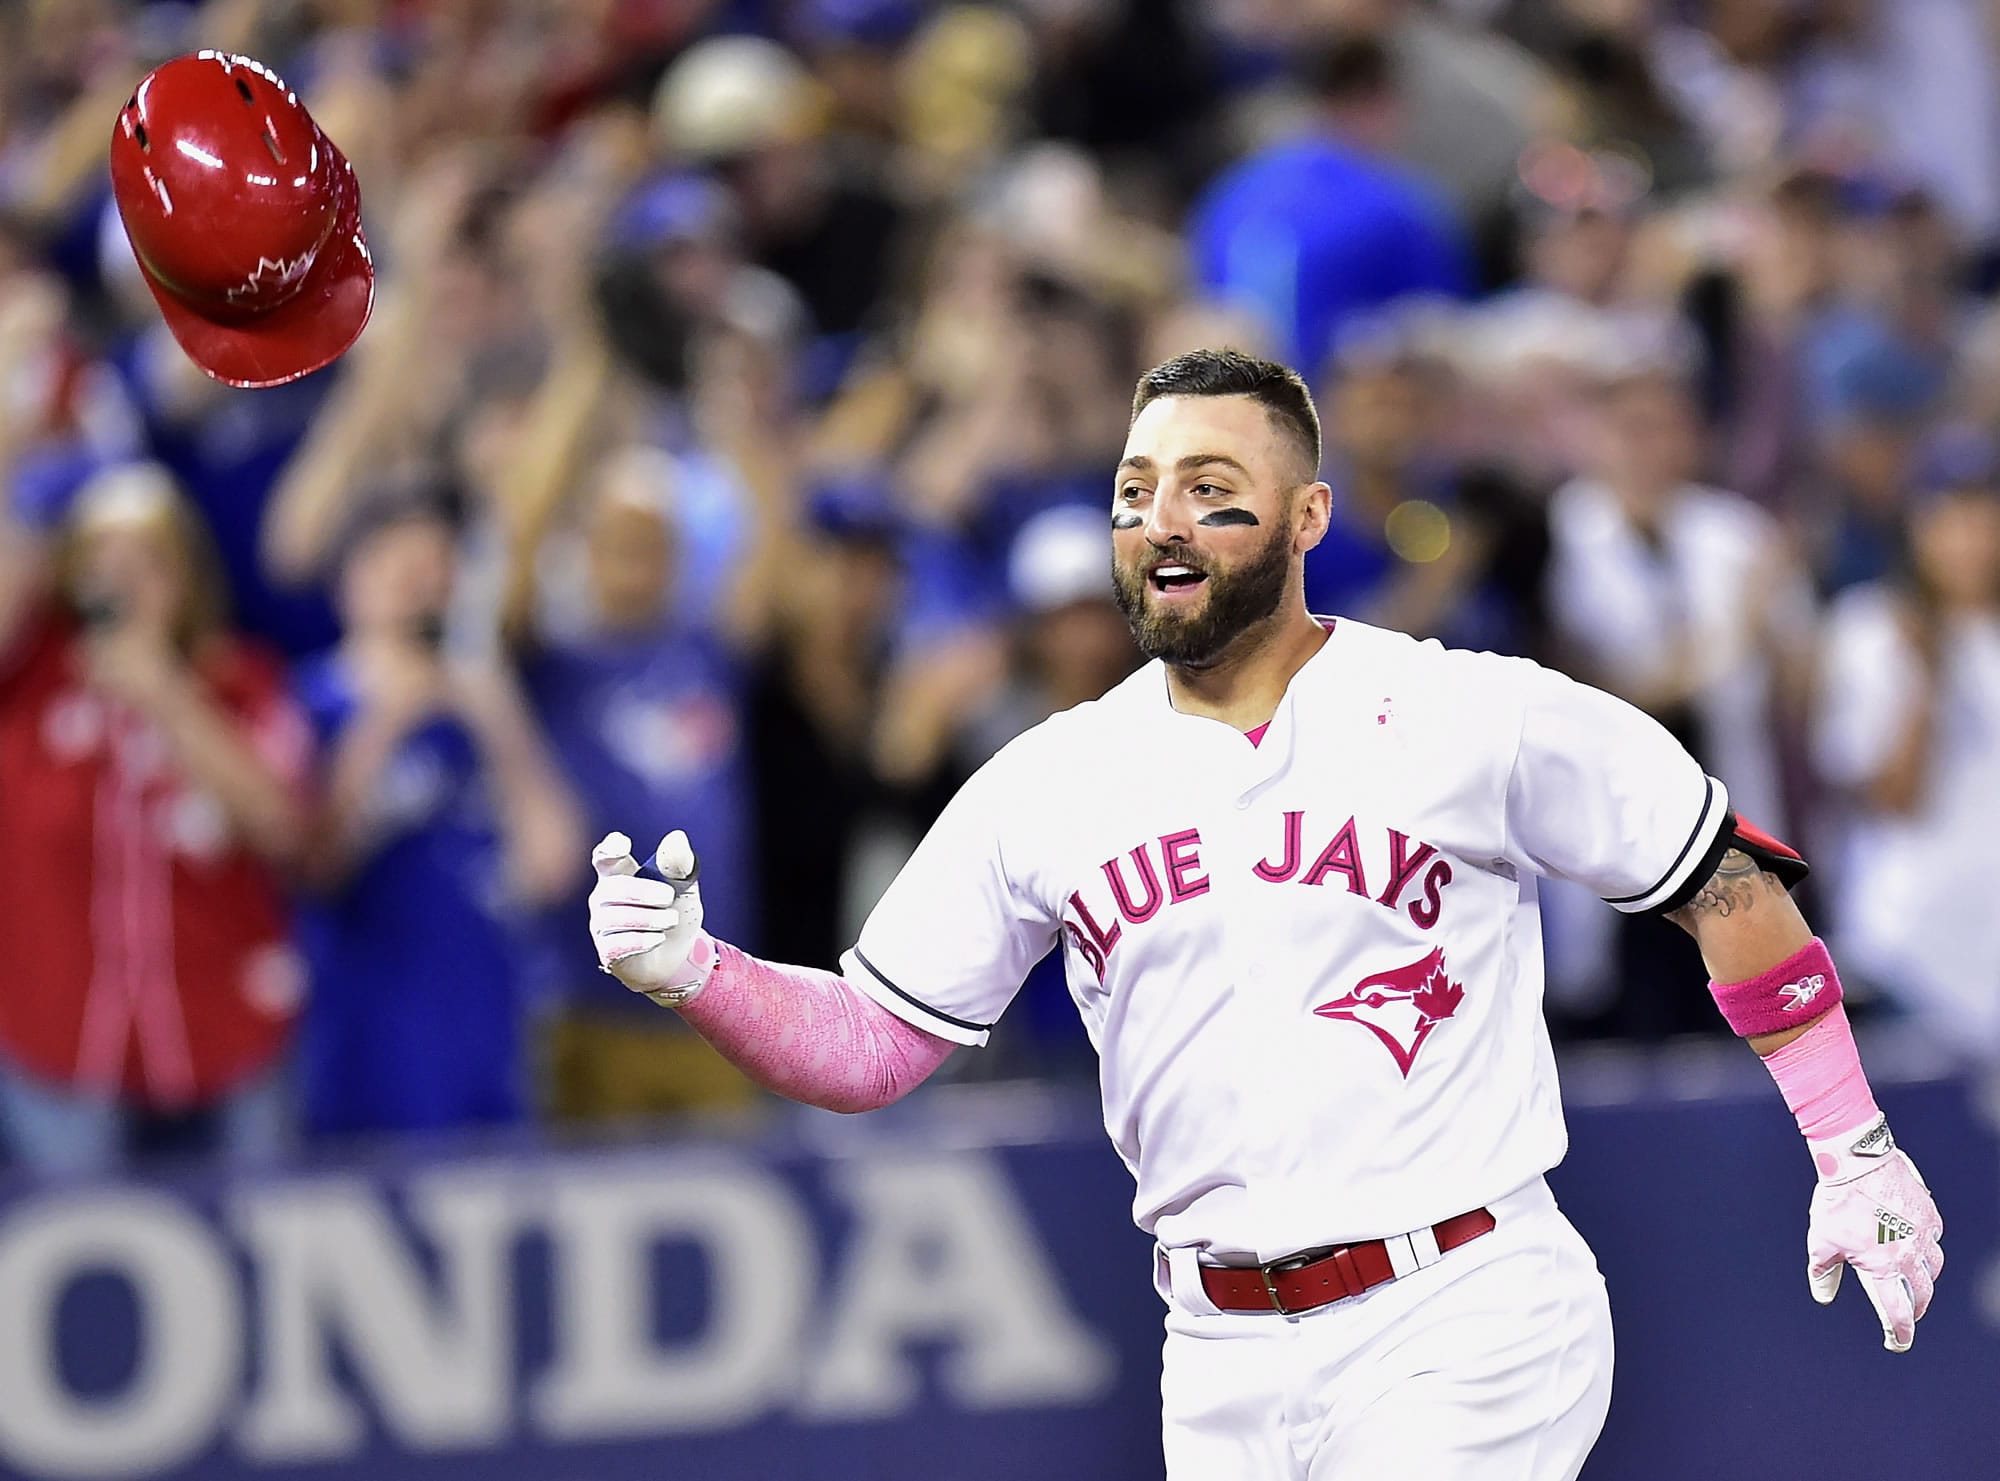 Toronto Blue Jays outfielder Kevin Pillar (11) celebrates his game winning home run against the Seattle Mariners during ninth inning American League baseball action in Toronto, Sunday, May 14, 2017.